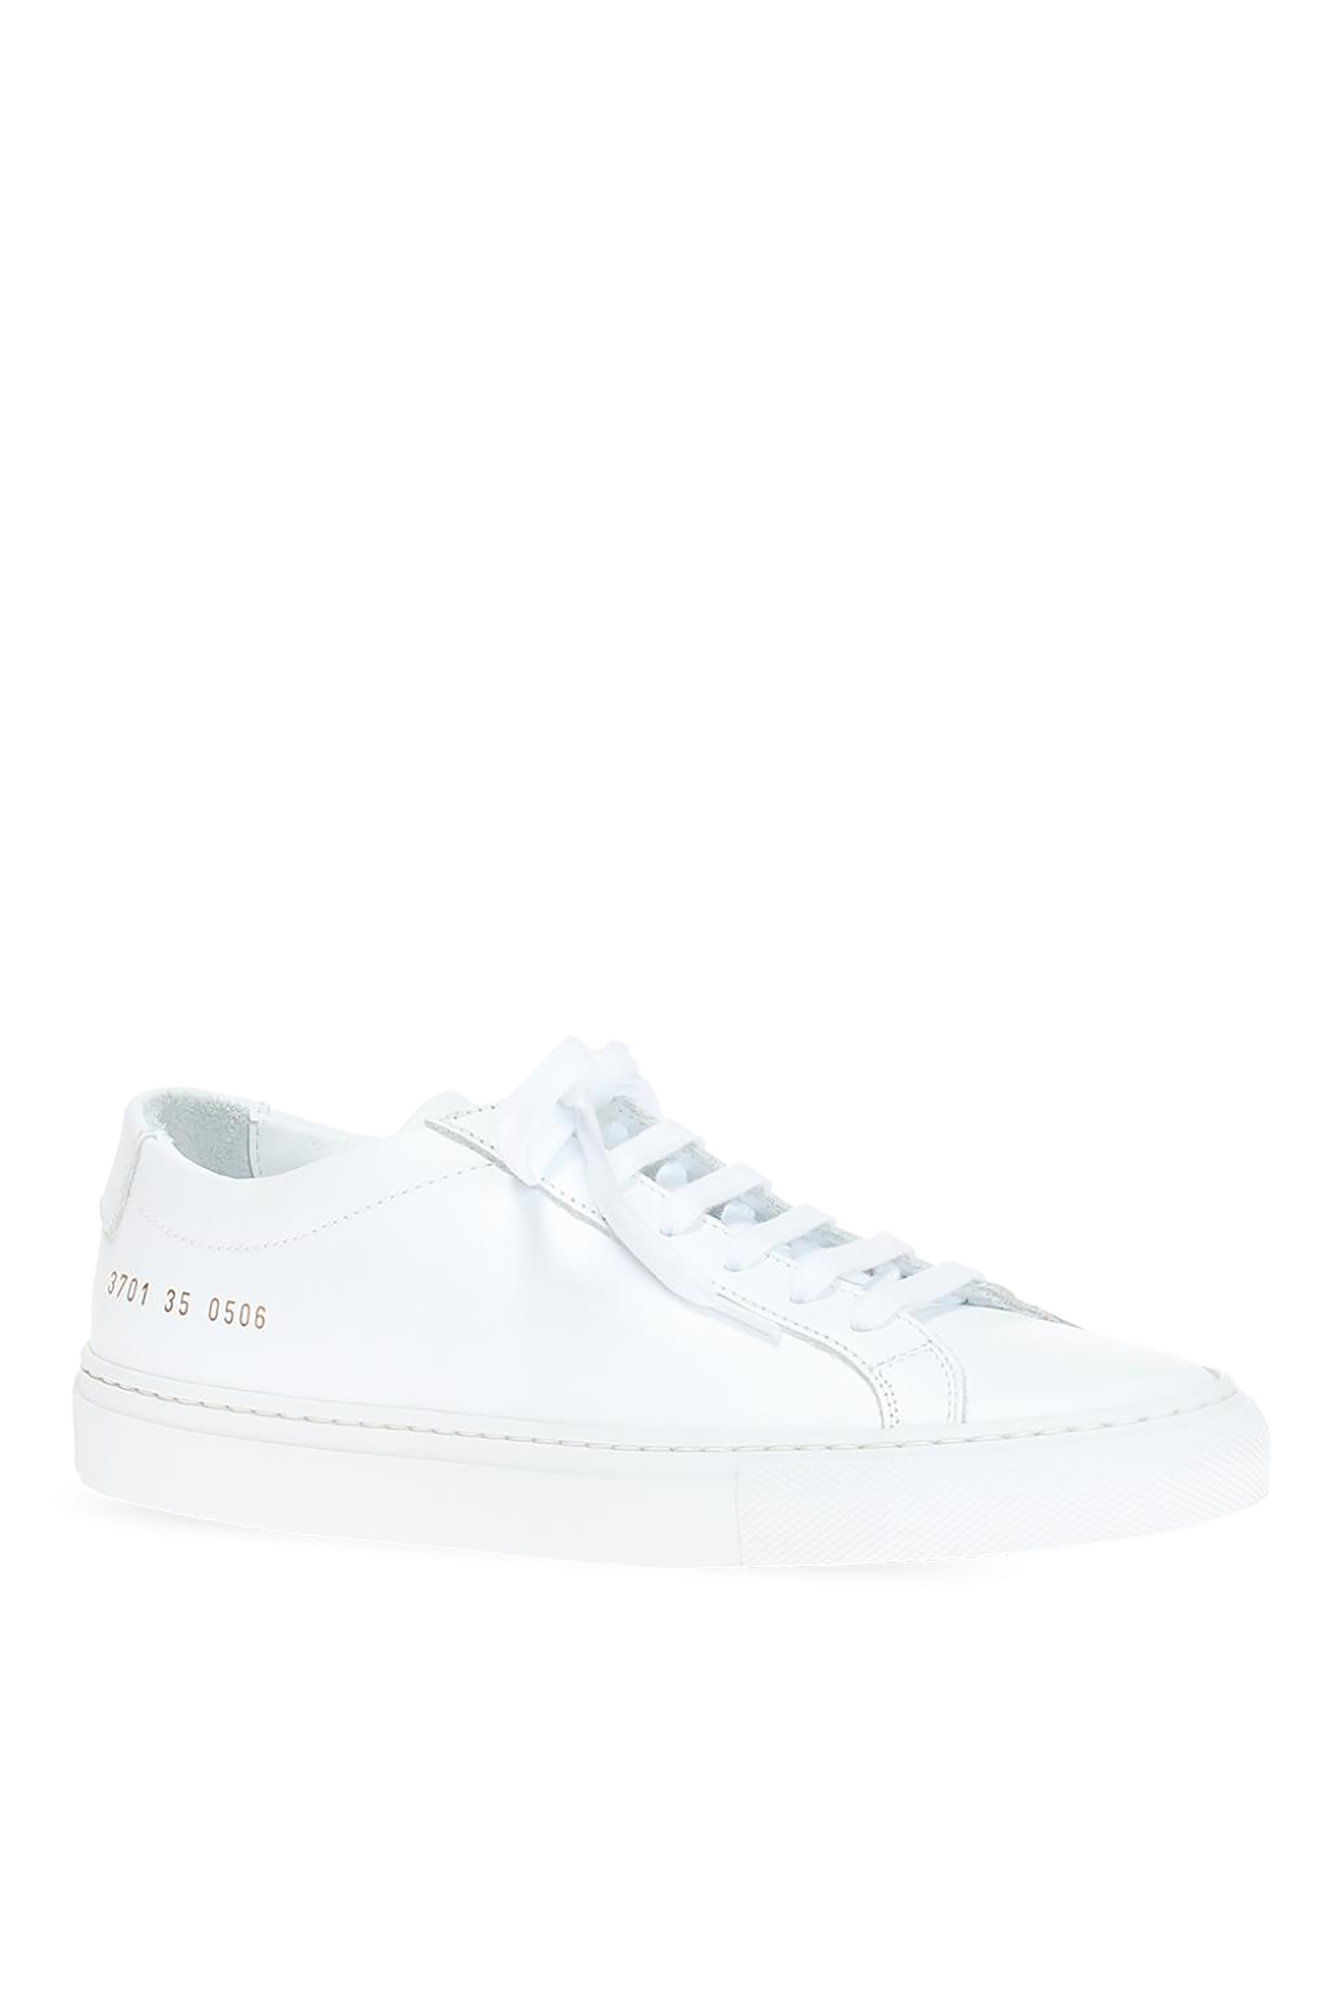 Common Projects 'Original Achilles' sneakers